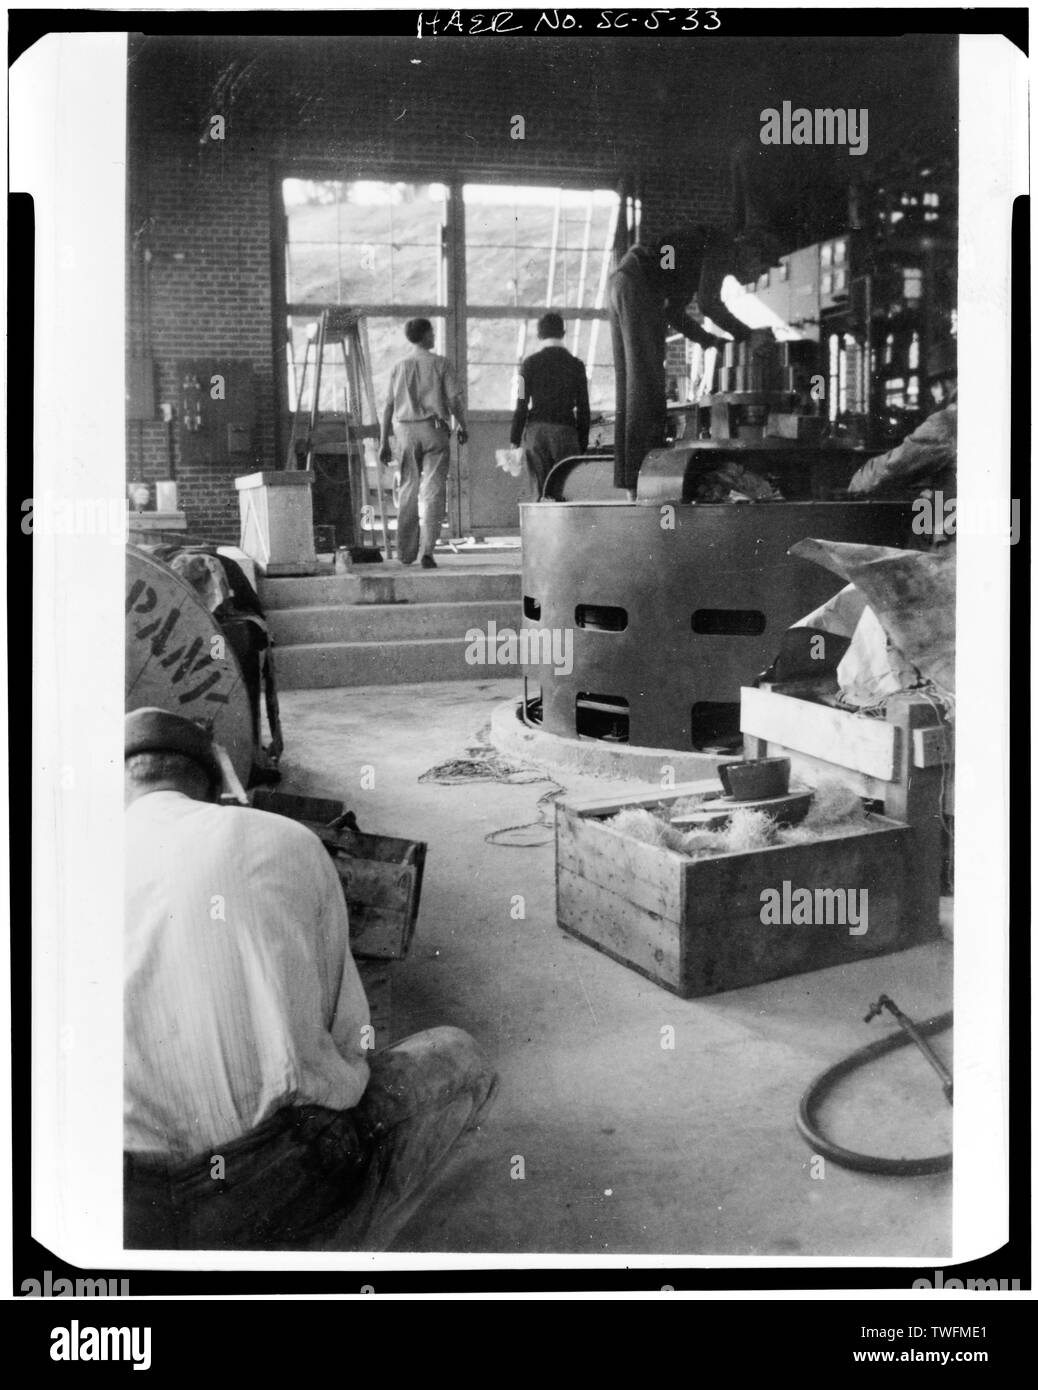 POWER PLANT INTERIOR, GENERATOR INSTALLATION - Abbeville Hydroelectric Power Plant, State Highway 284 and County Road 72, Rocky River (historical), Abbeville County, SC; Abbeville Water and Electric Plant Company; Pennell, James Roy; White, W H; Abbeville Power Company Incorporated; D.M. Rickenbacker Construction Company; Townsend, C P; Wideman and Singleton; Britton, John B; S. Morgan Smith Company; Woodward Governor Company; Bethlehem Steel Company; Westinghouse Corporation; Bush Sulzer Brothers Company; Mark Brothers; Cary, Brian, transmitter Stock Photo